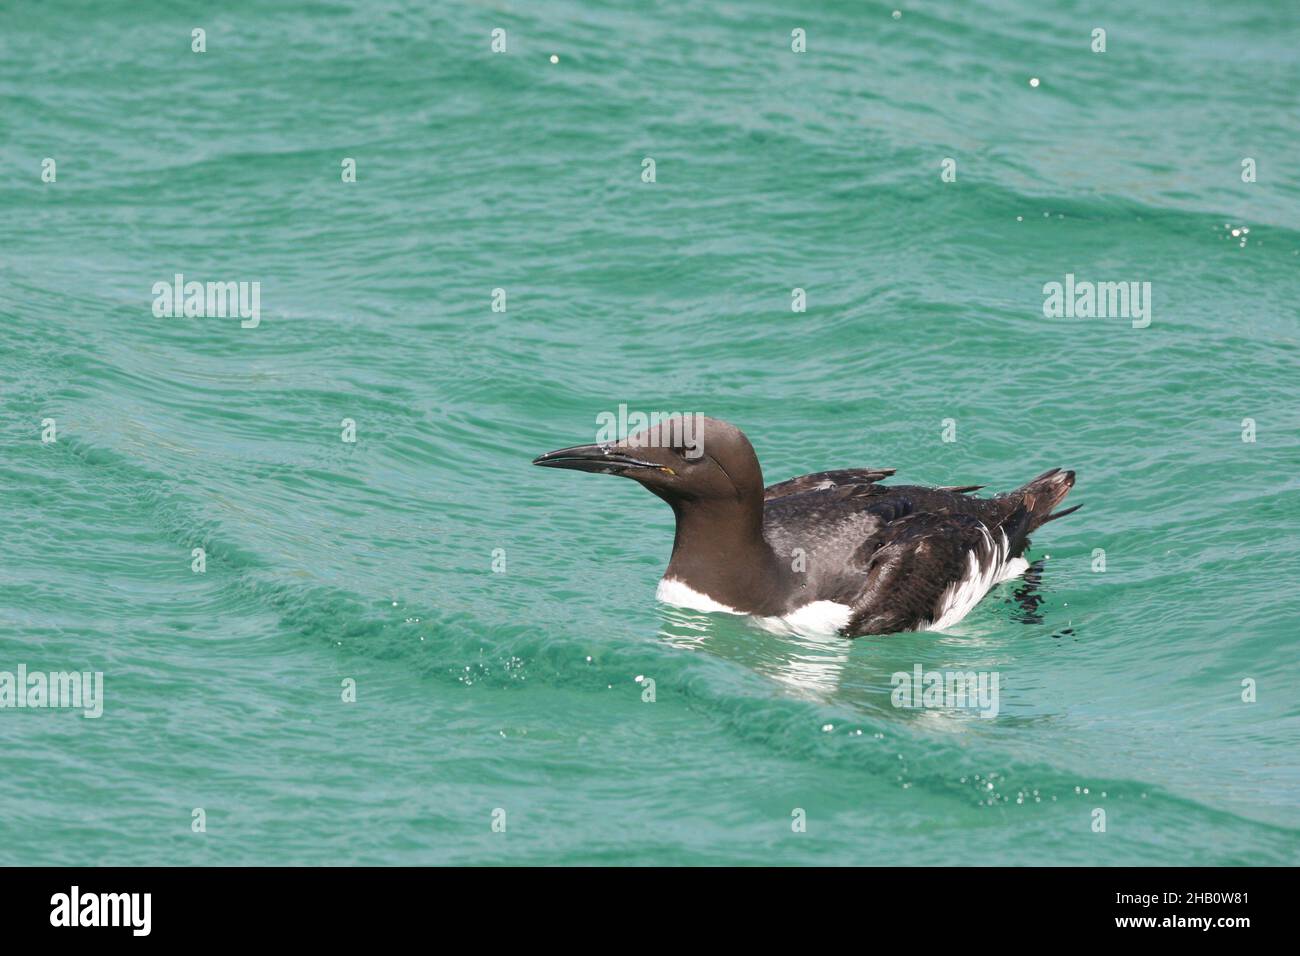 Guillemot feed close to the nest catching a beak full of fish before returning to the nest to feed the chick.  Sand eels are a favourite food. Stock Photo